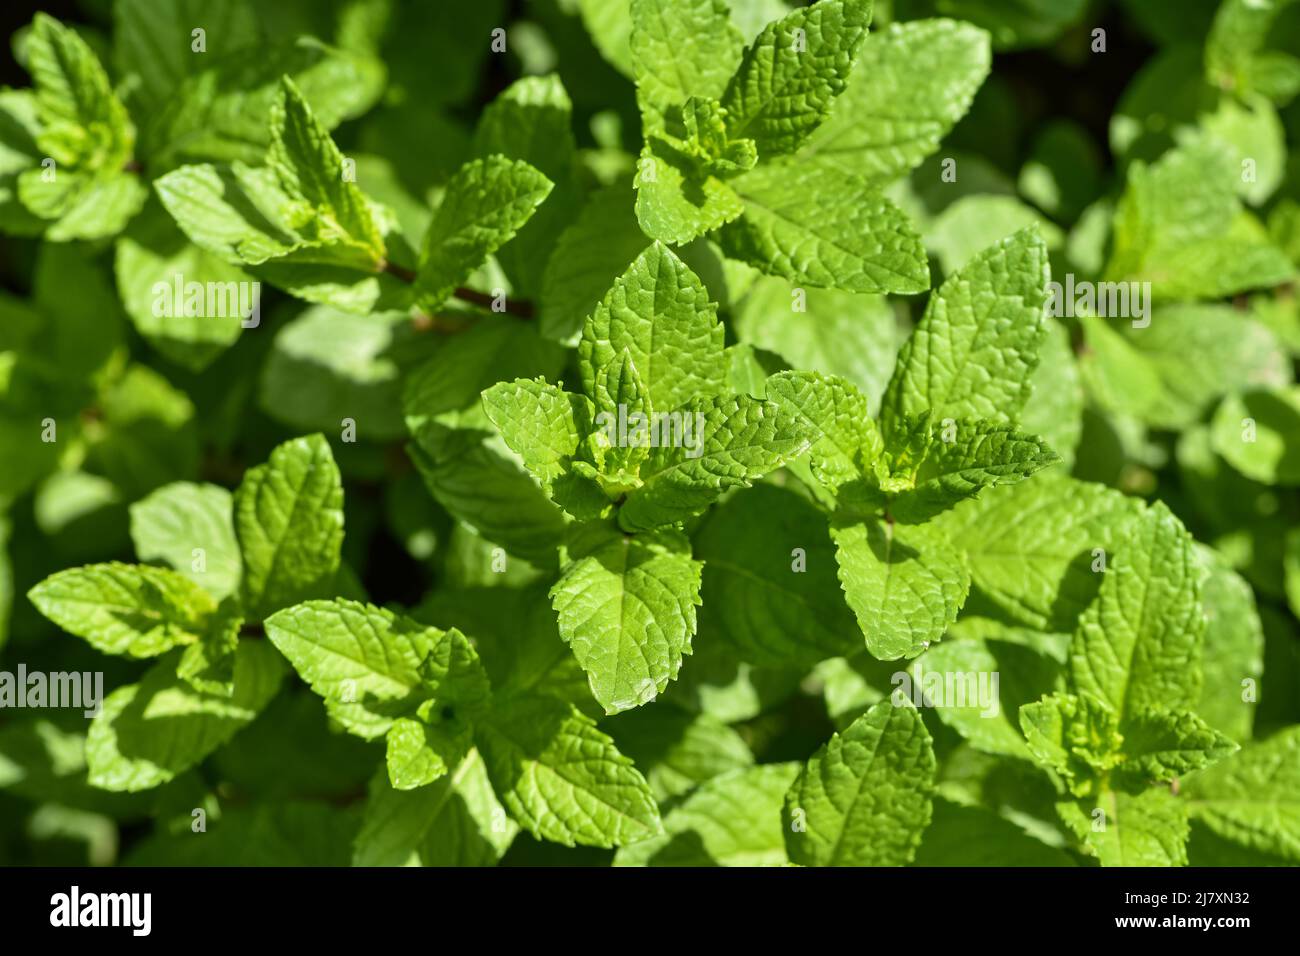 Perennial herbaceous plant in the mint family - Spearmint, Garden mint, Menthol Mint in the garden bed Stock Photo